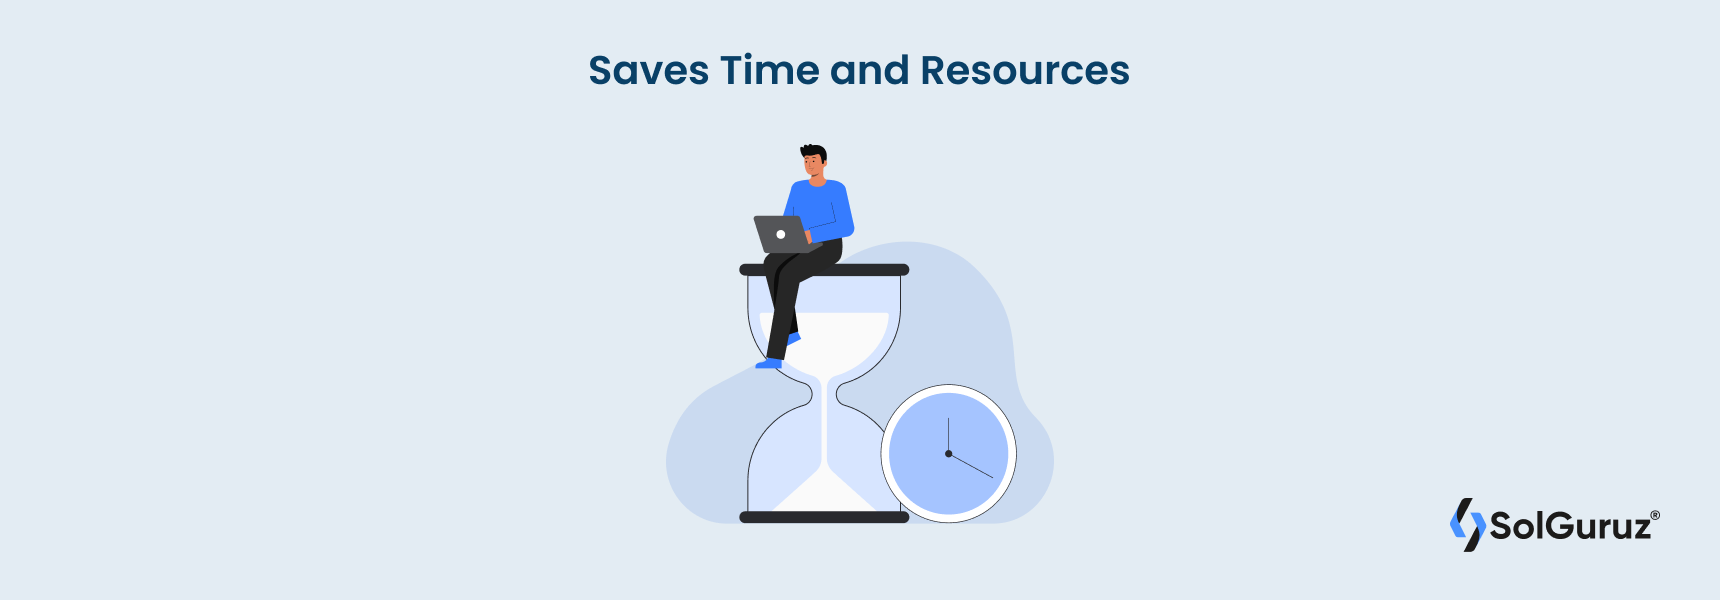 MVP Development benefit - Saves Time and Resources